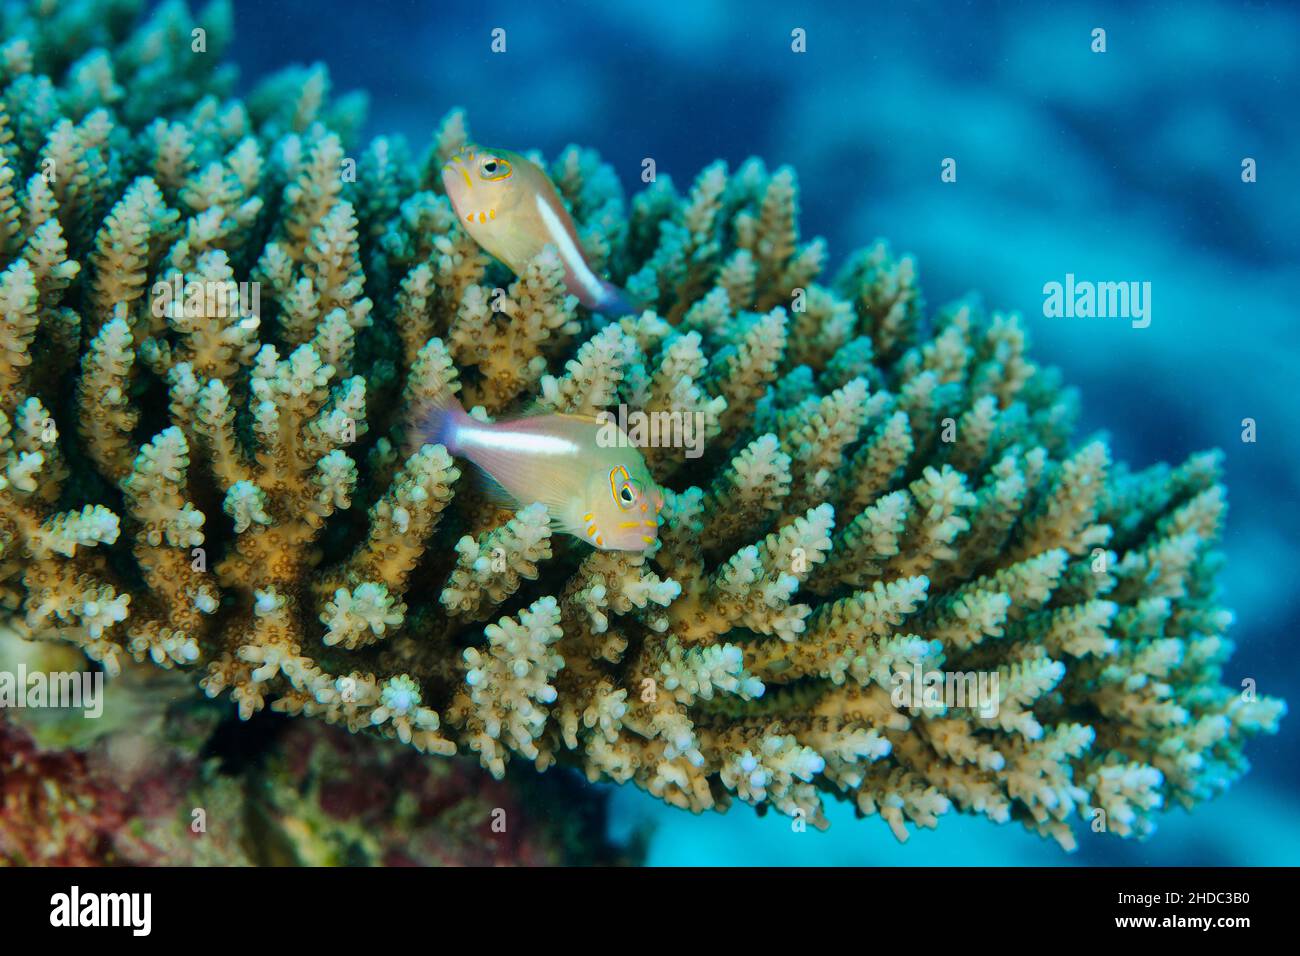 Pair of arc-eye hawkfish (Paracirrhites arcatus) sitting on staghorn coral, small polyp stony coral (Acropora), Pacific Ocean, Yap Island, Micronesia Stock Photo